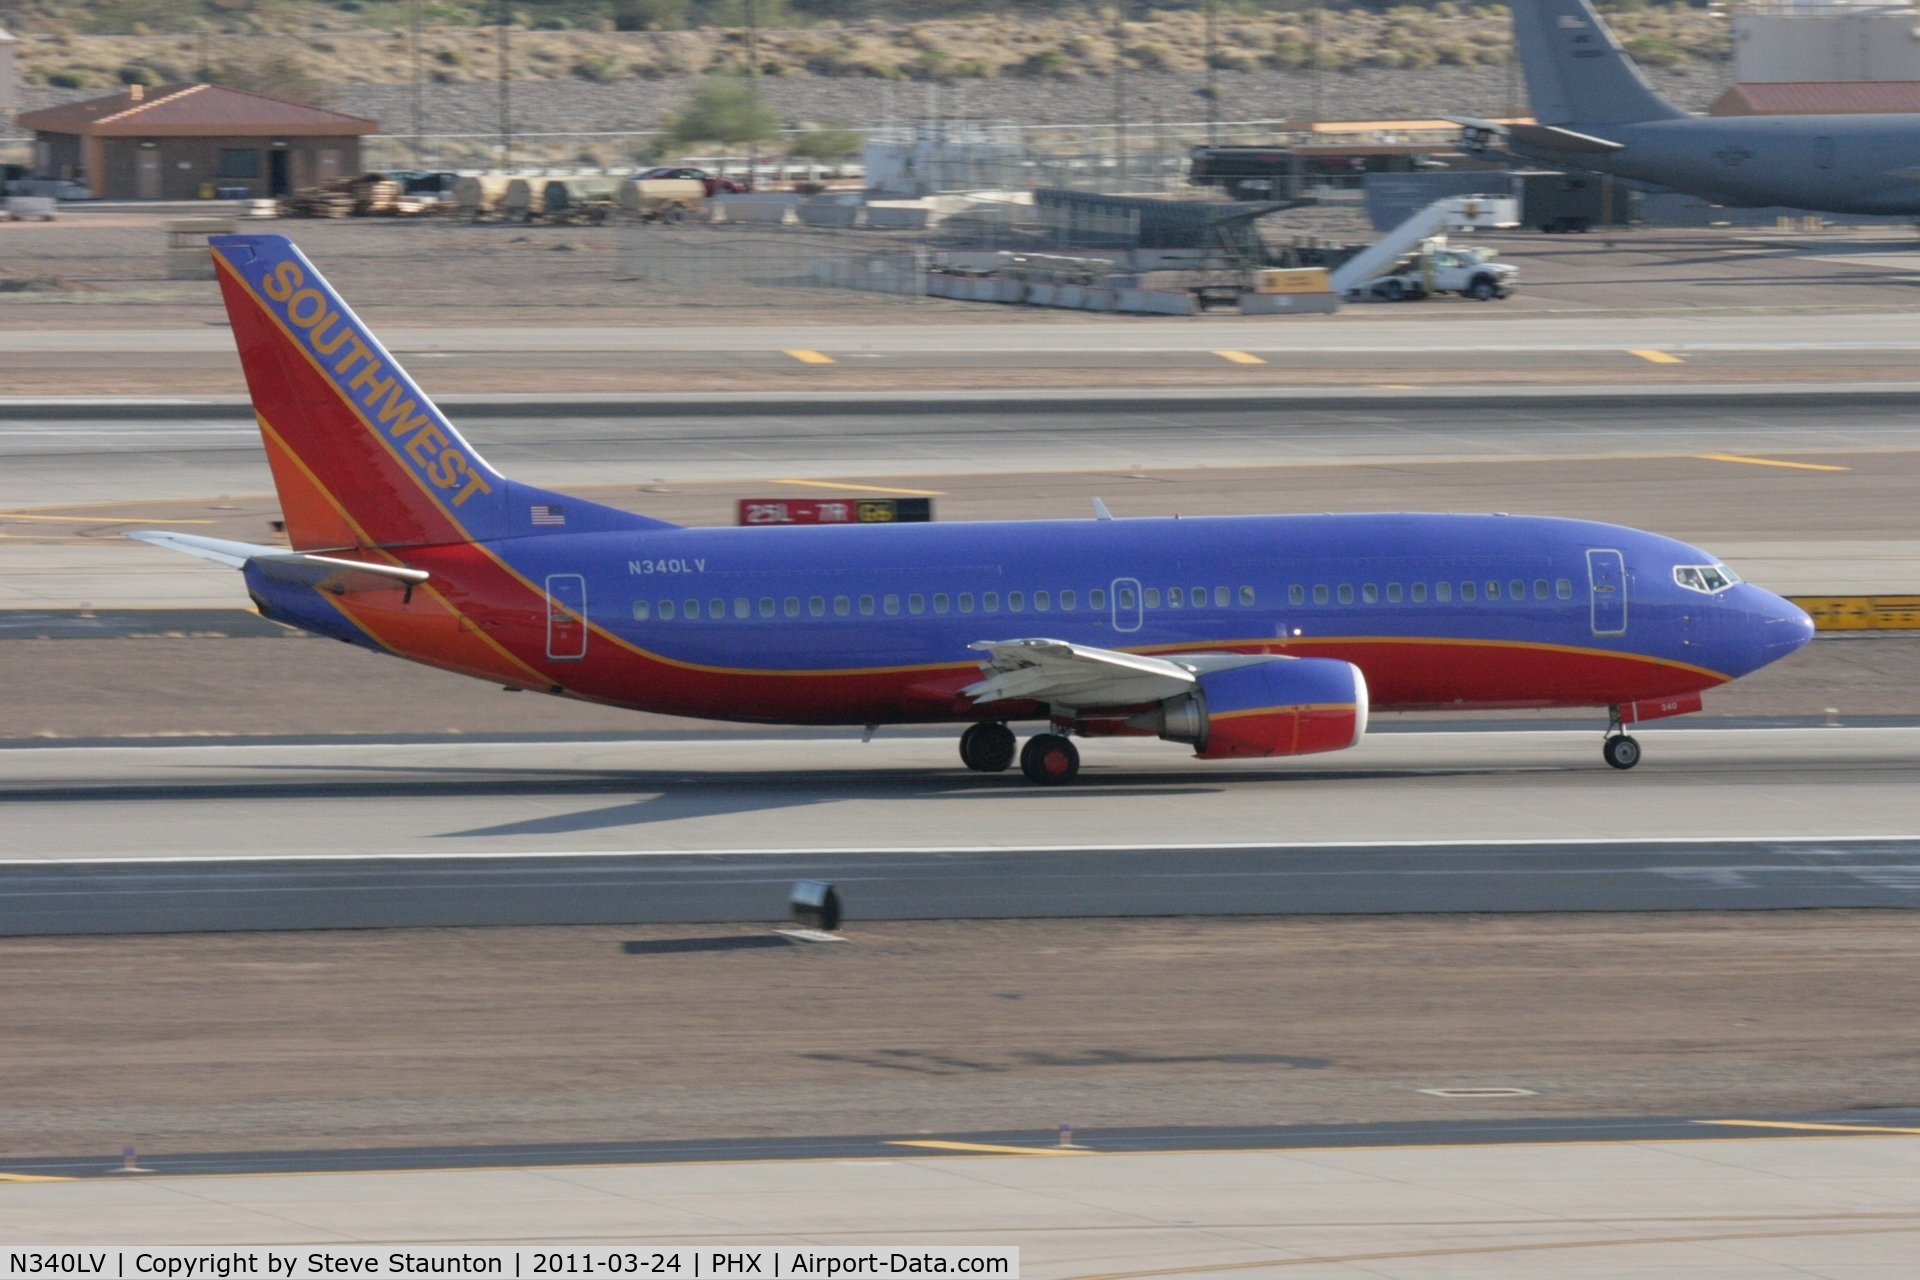 N340LV, 1987 Boeing 737-3K2 C/N 23738, Taken at Phoenix Sky Harbor Airport, in March 2011 whilst on an Aeroprint Aviation tour